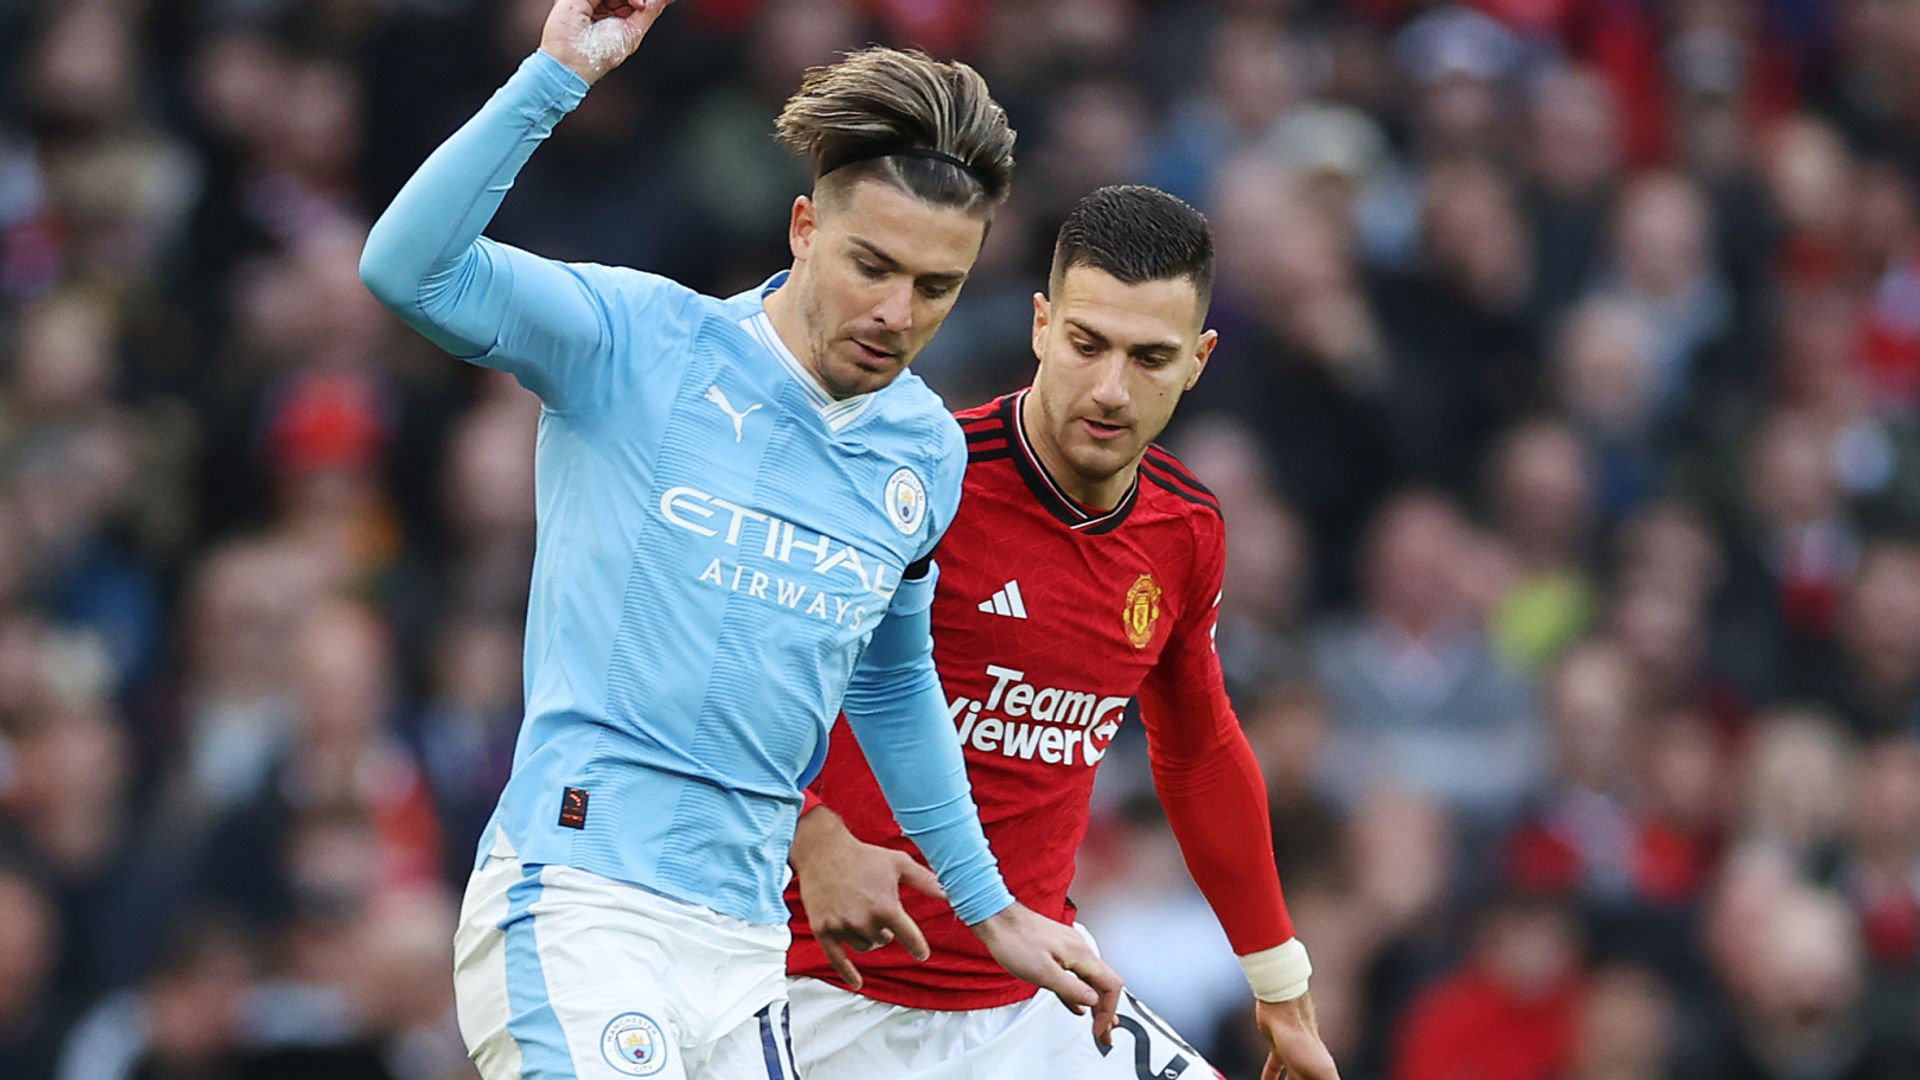 Manchester derby to be shown live on Sky Sports in March